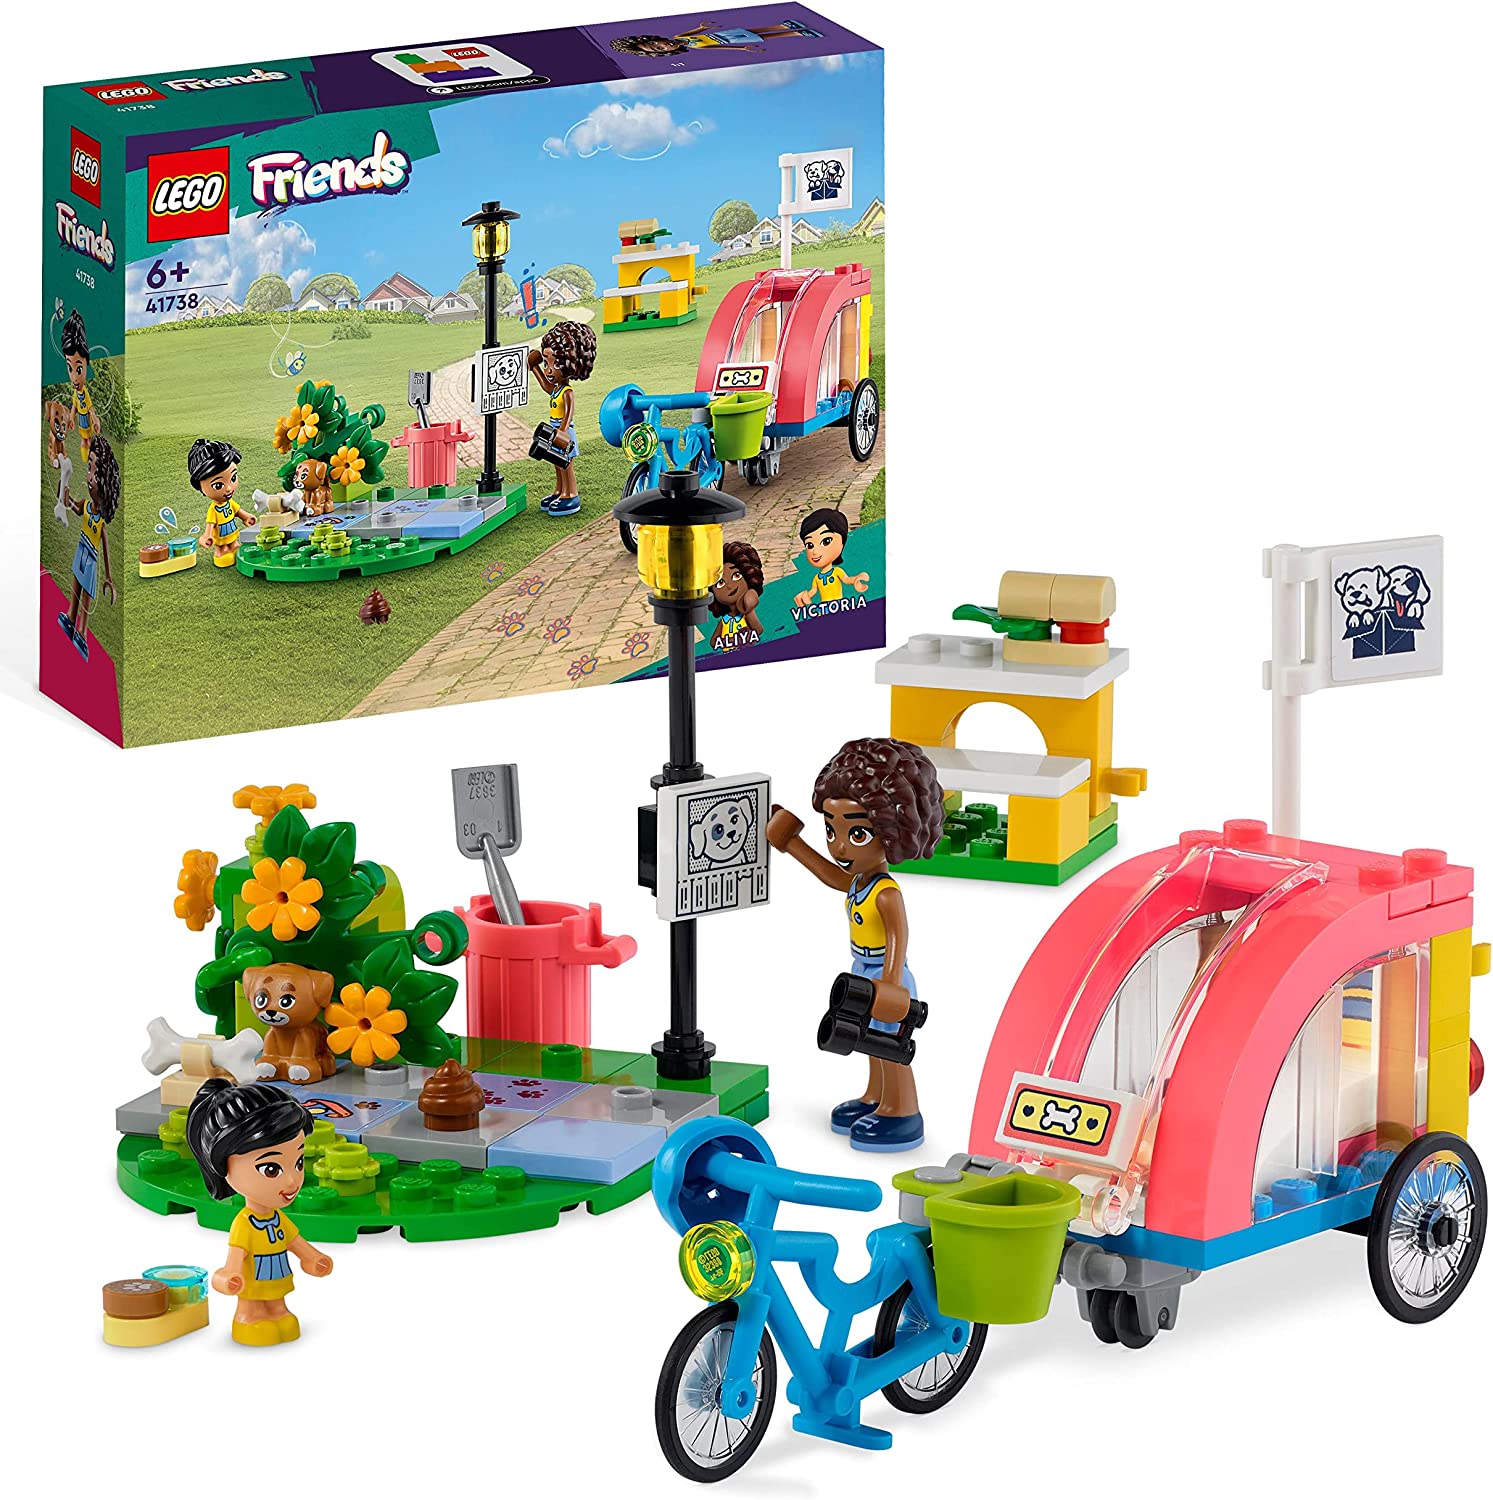 LEGO 41738 Friends Dog Rescue Bike, Animal Rescue Toy with Puppy Animal Figures and Mini Dolls from 2023 for Children from 6 Years